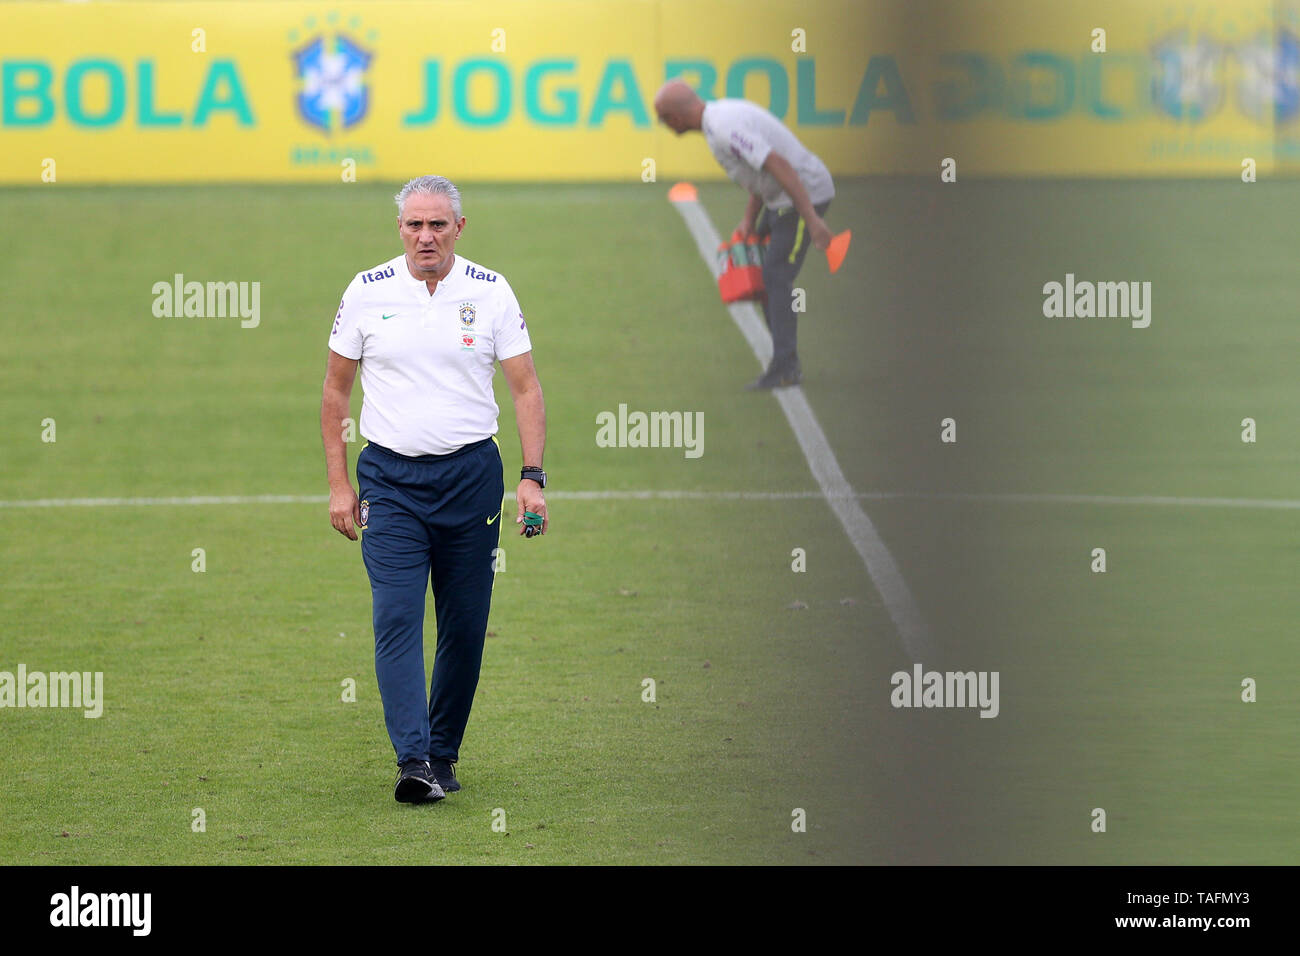 Teresopolis, Brazil. 24th May, 2019. Head coach Tite walks on the pitch during a training session of the Brazilian national soccer team ahead of the Copa America 2019 football tournament in Teresopolis, the state of Rio de Janeiro, Brazil, on May 24, 2019. Credit: Li Ming/Xinhua/Alamy Live News Stock Photo